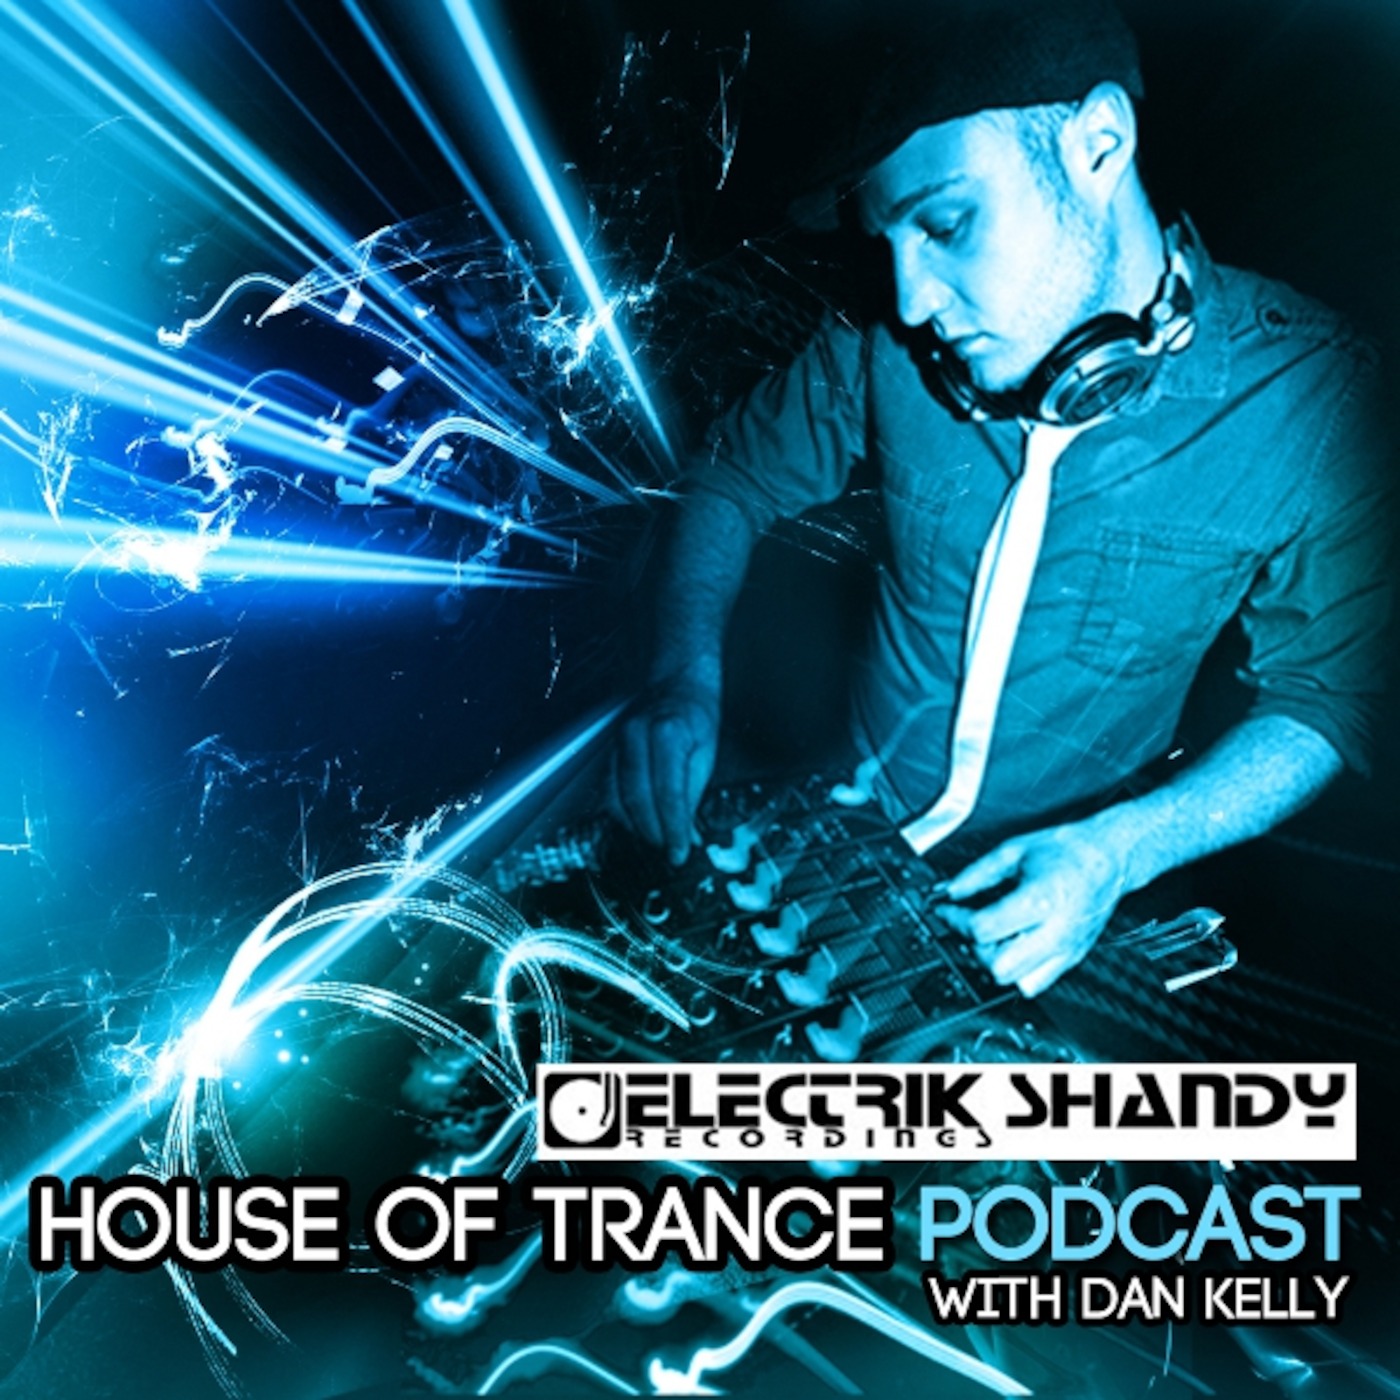 House Of Trance Podcast with Dan Kelly